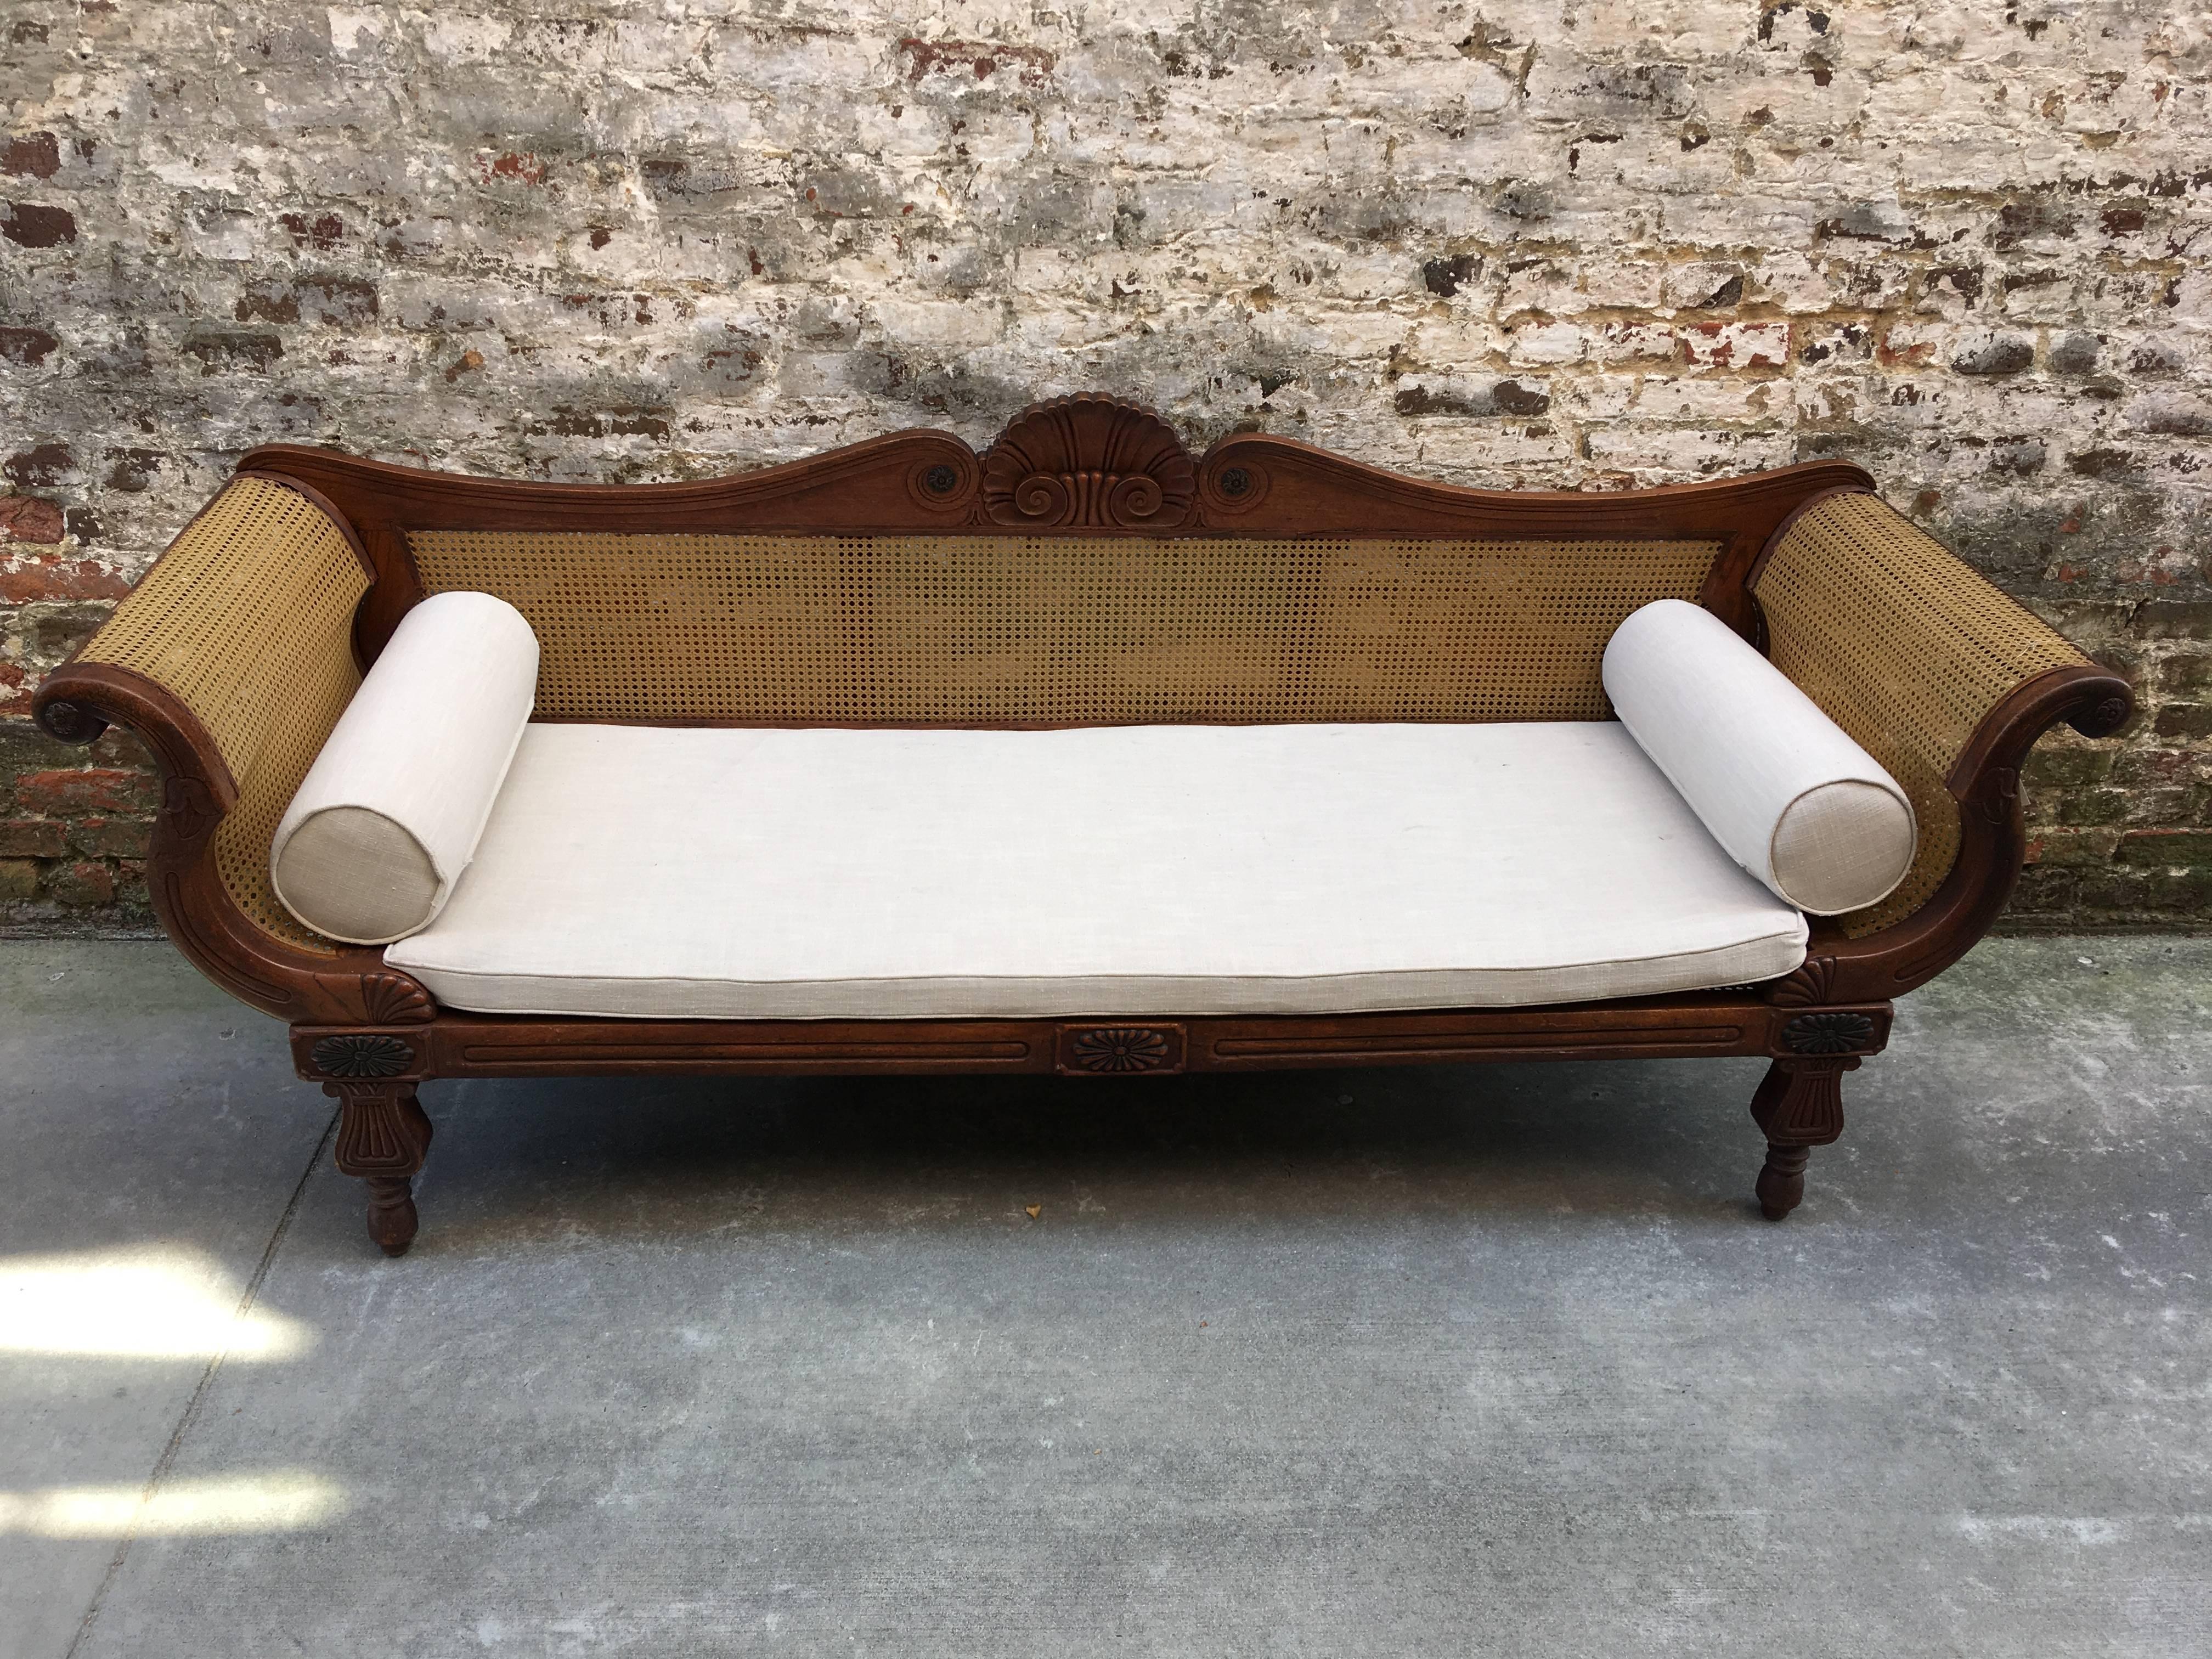 West Indian rolled arm sofa with carved back and leg, circa 1840 with restored cane.